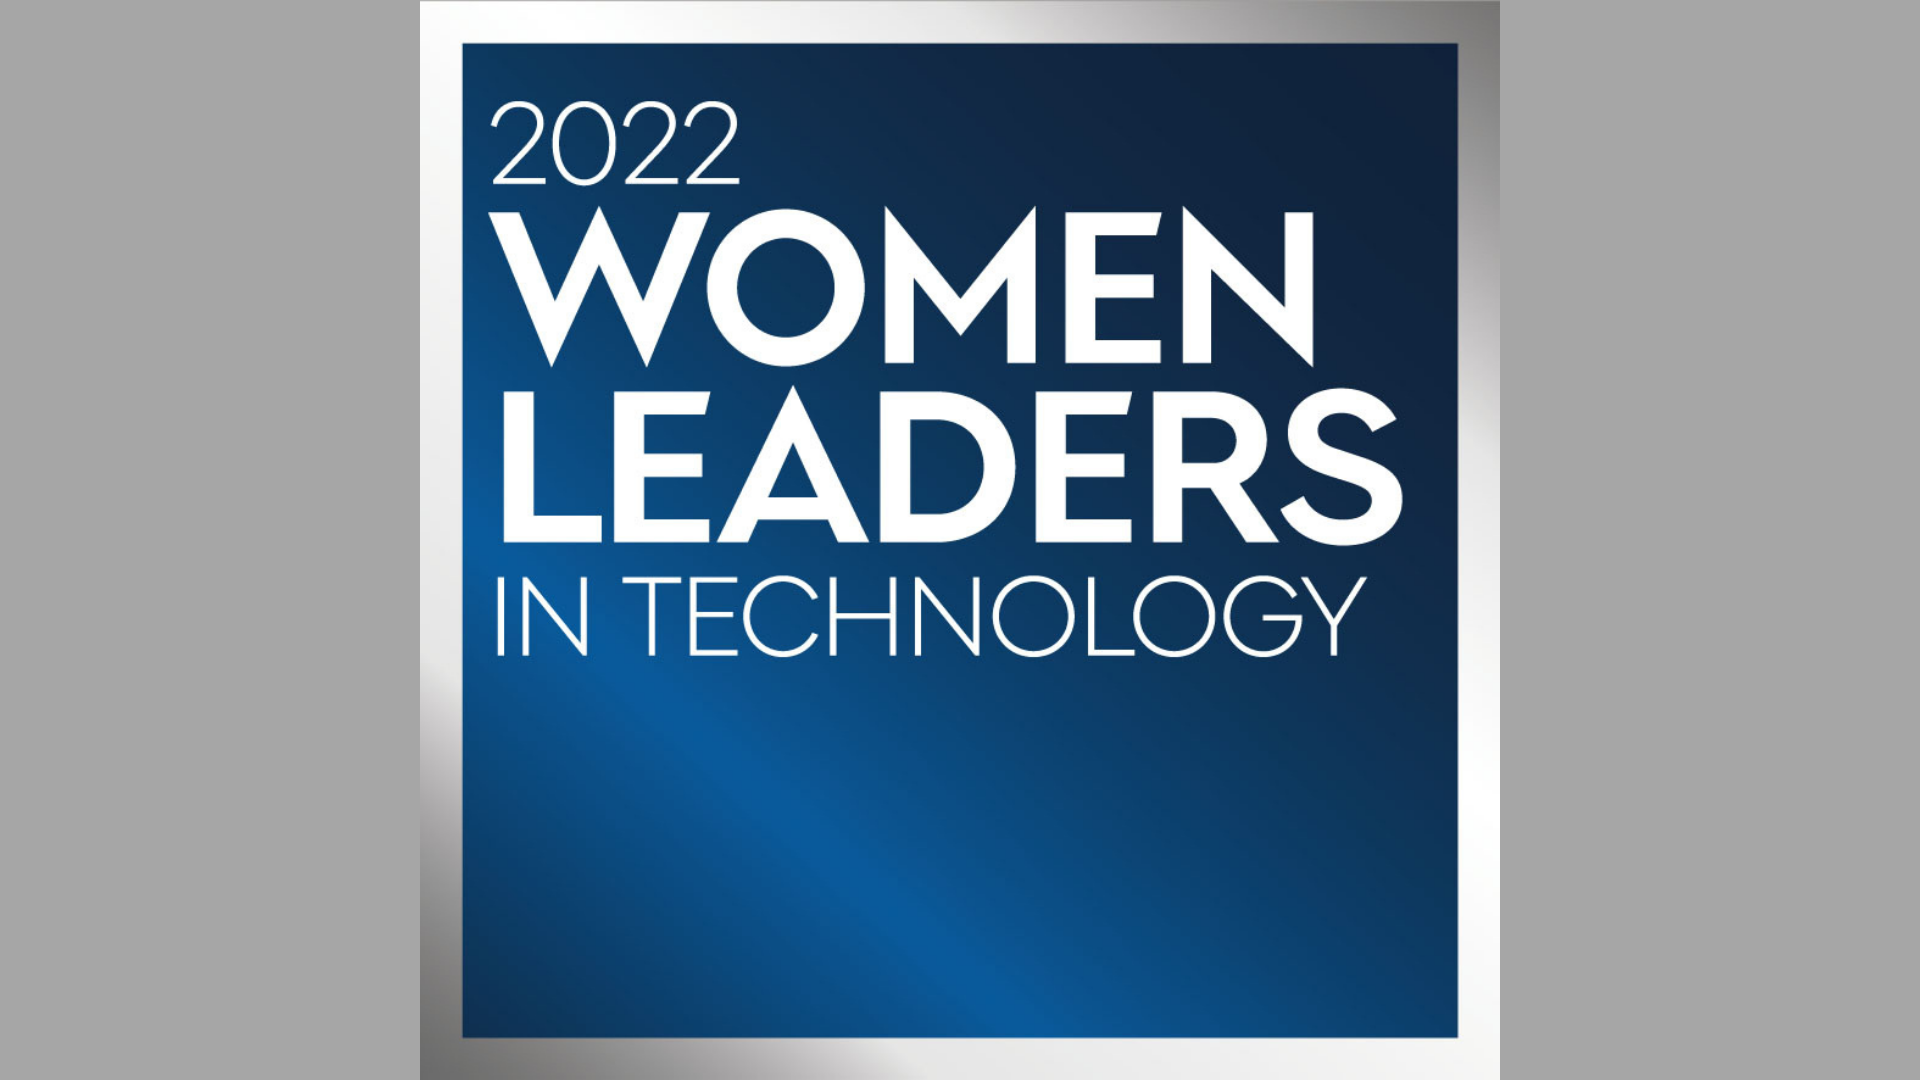 The 2022 Women Leaders in Technology: The Honorees